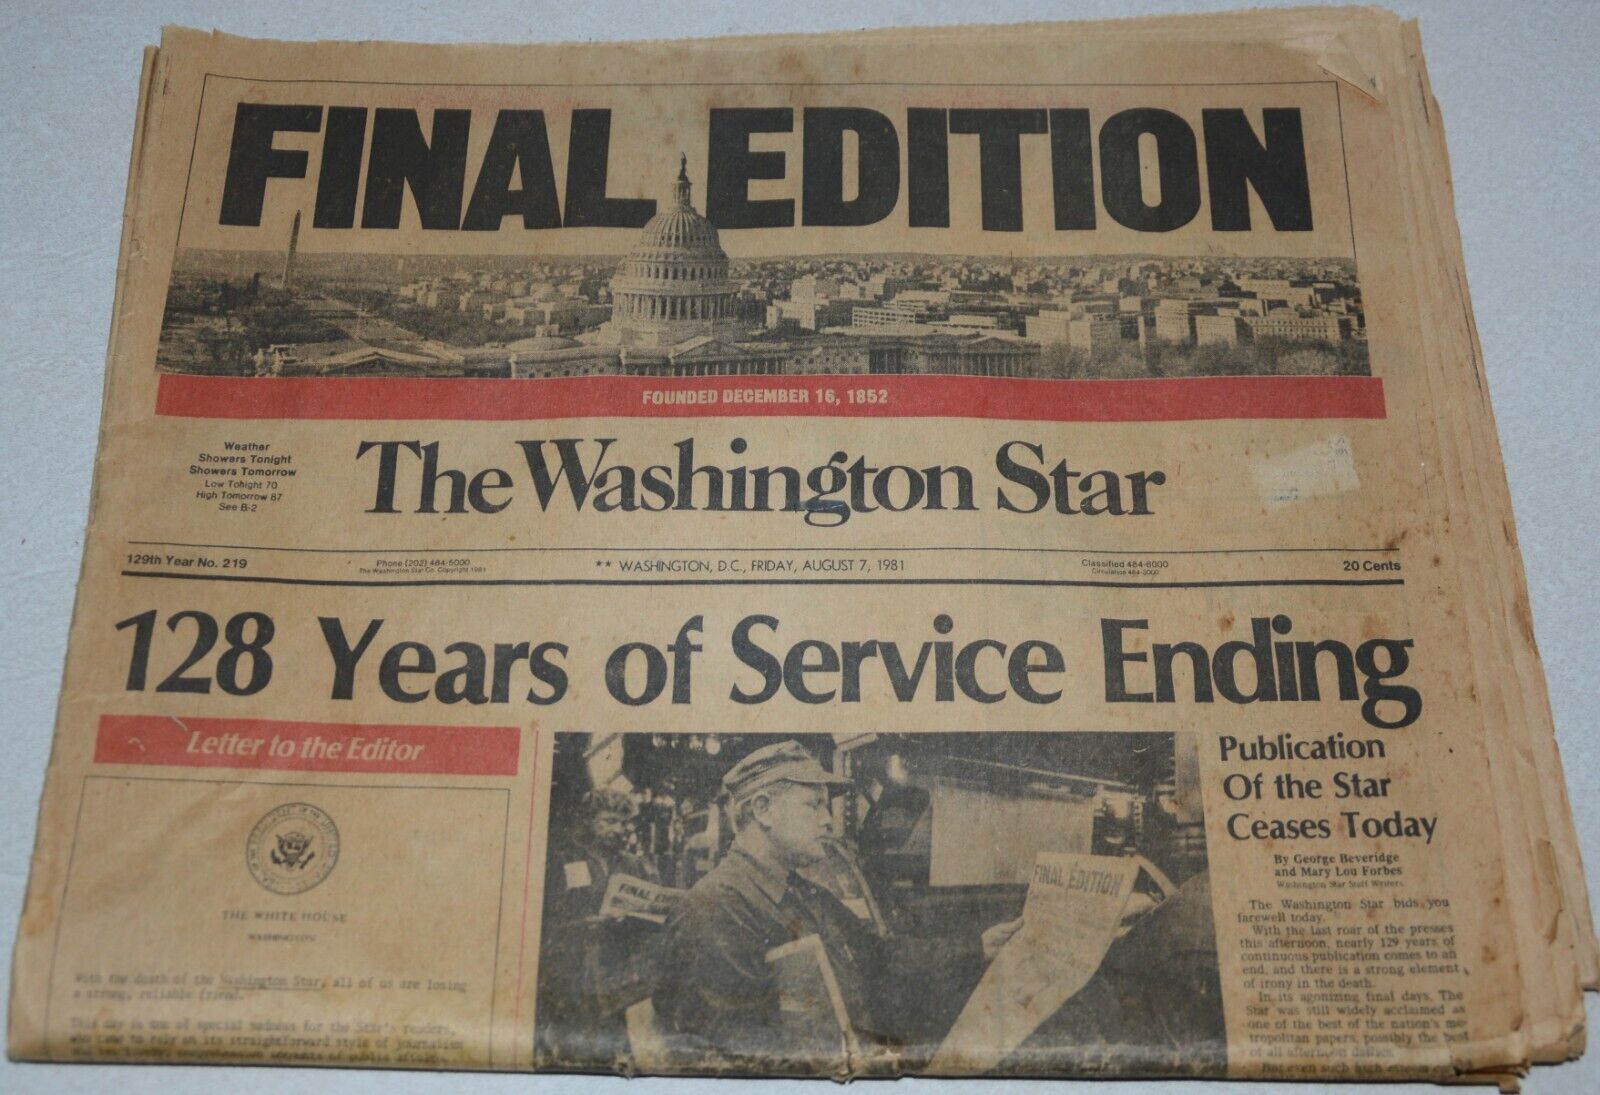 The Washington Star Complete Newspaper 1981 Final Edition August 7th 1981